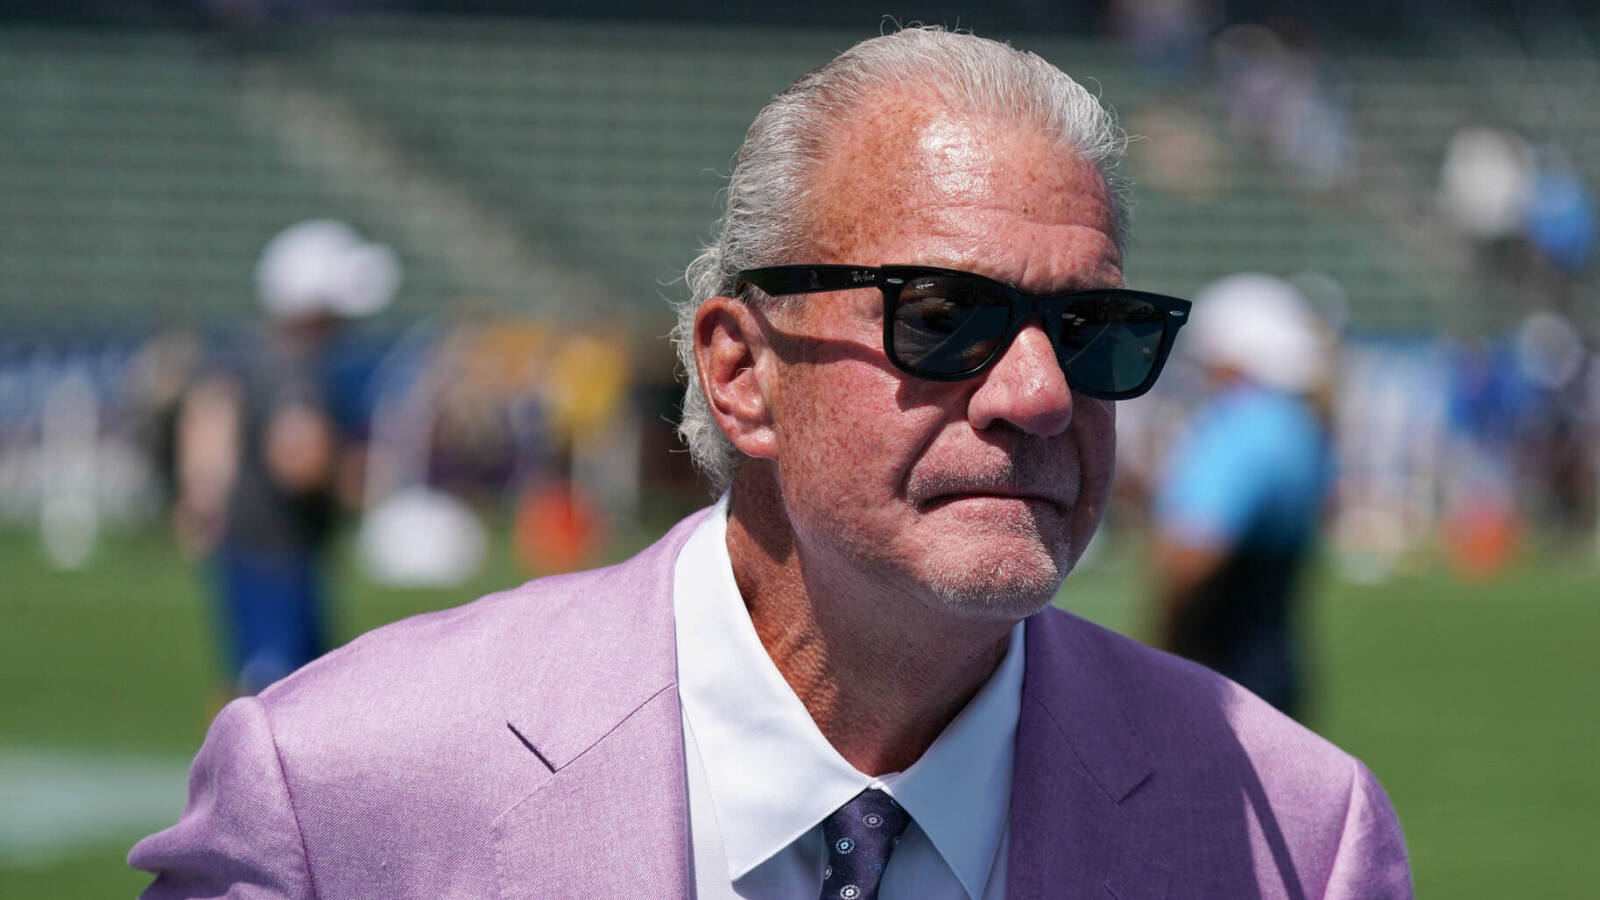 Colts owner Jim Irsay receiving treatment for serious illness